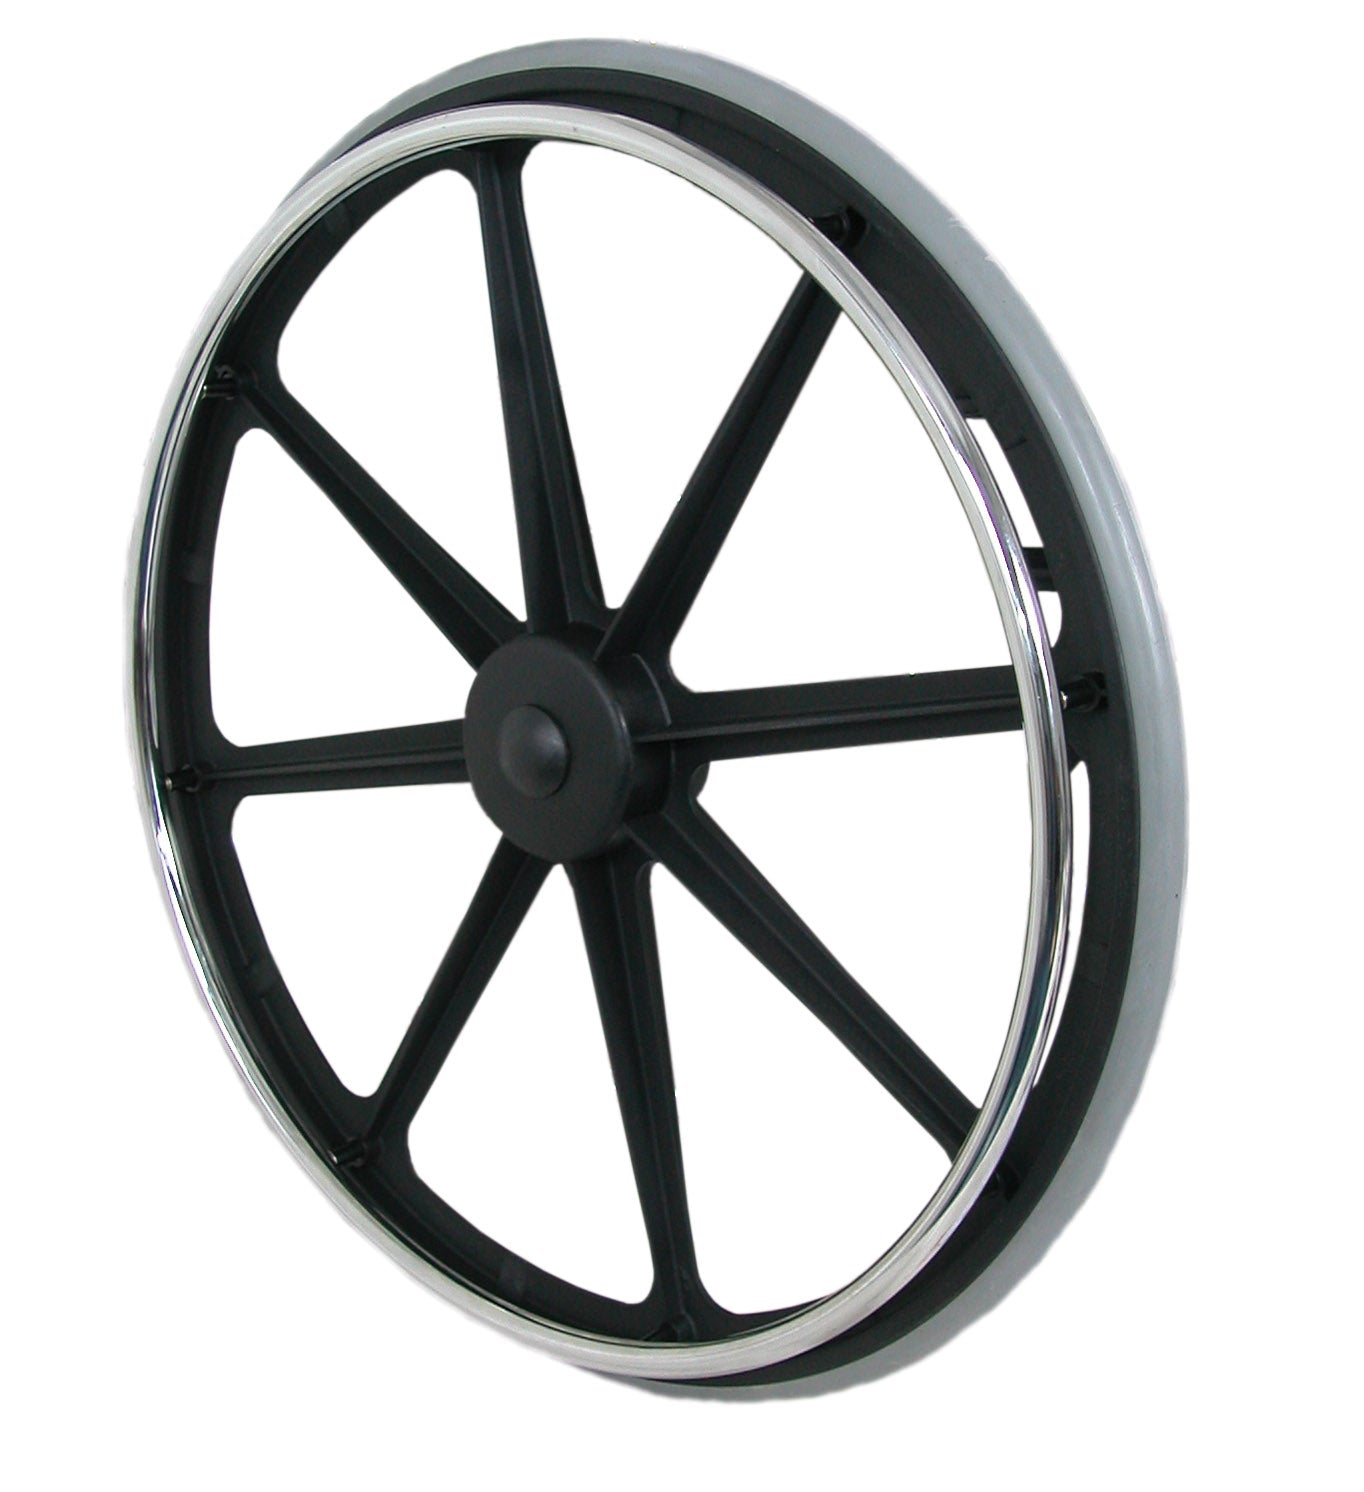 Rear Wheel Assembly for Wheelchair